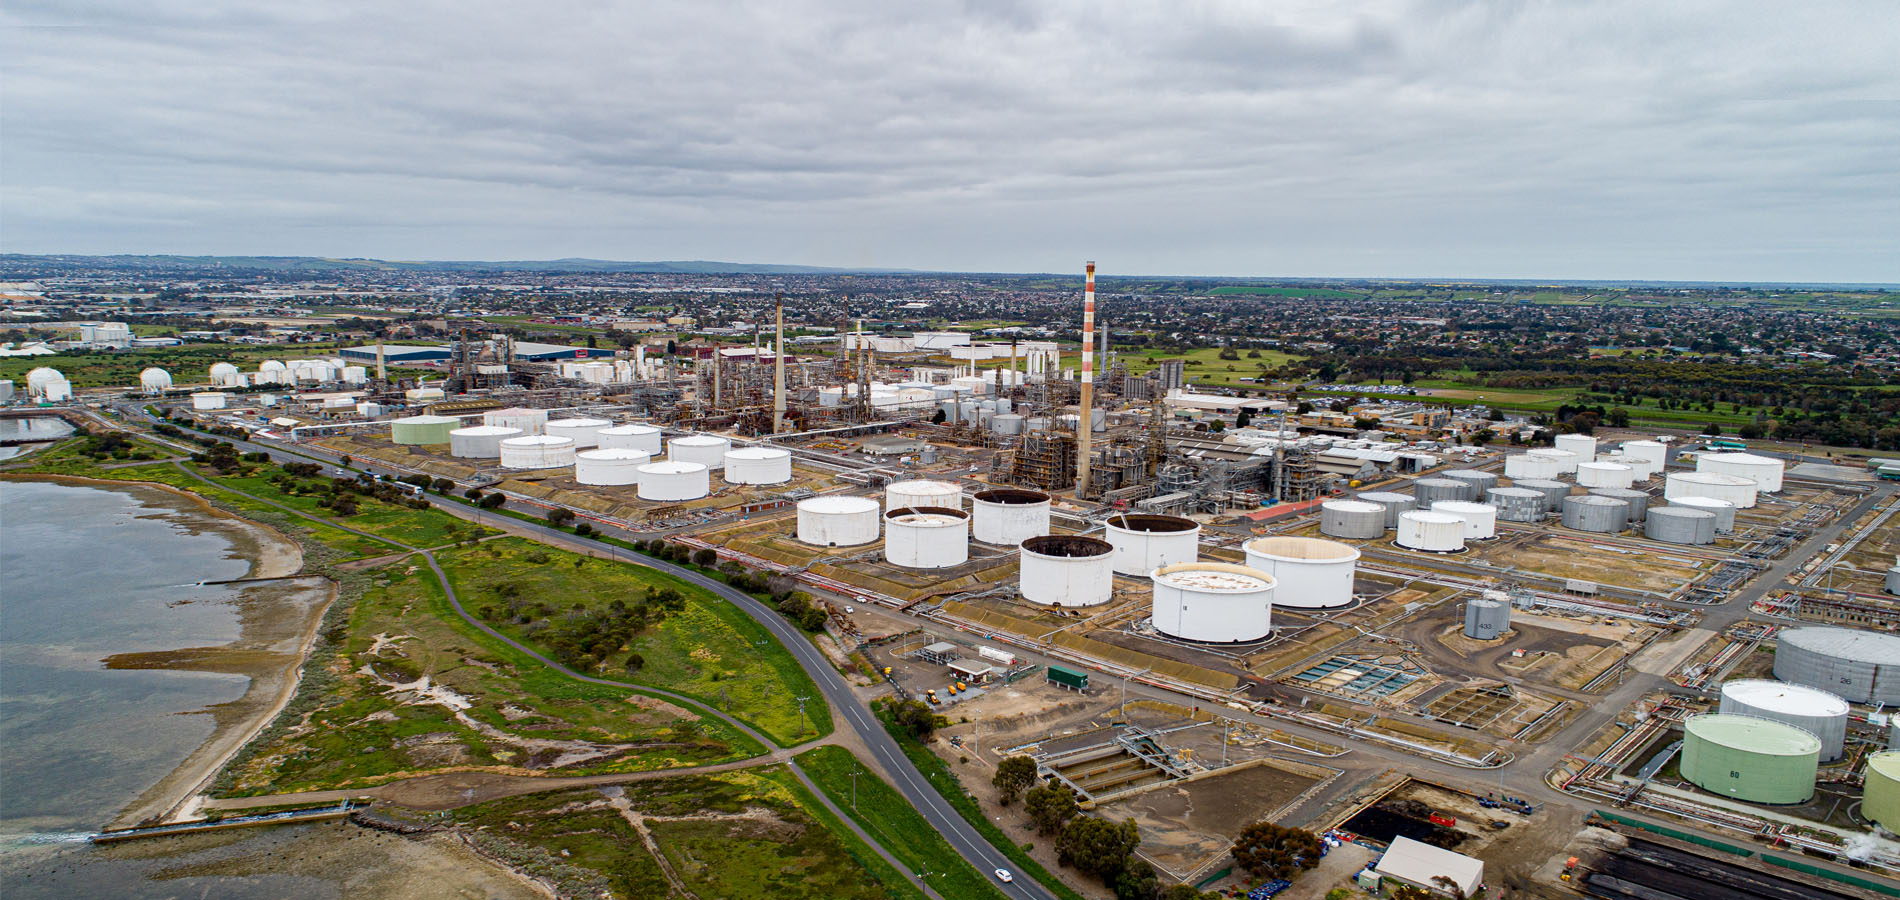 Our Geelong Refinery supplies around 50% of Victoria’s fuel and is a vital part of Australia’s energy security.